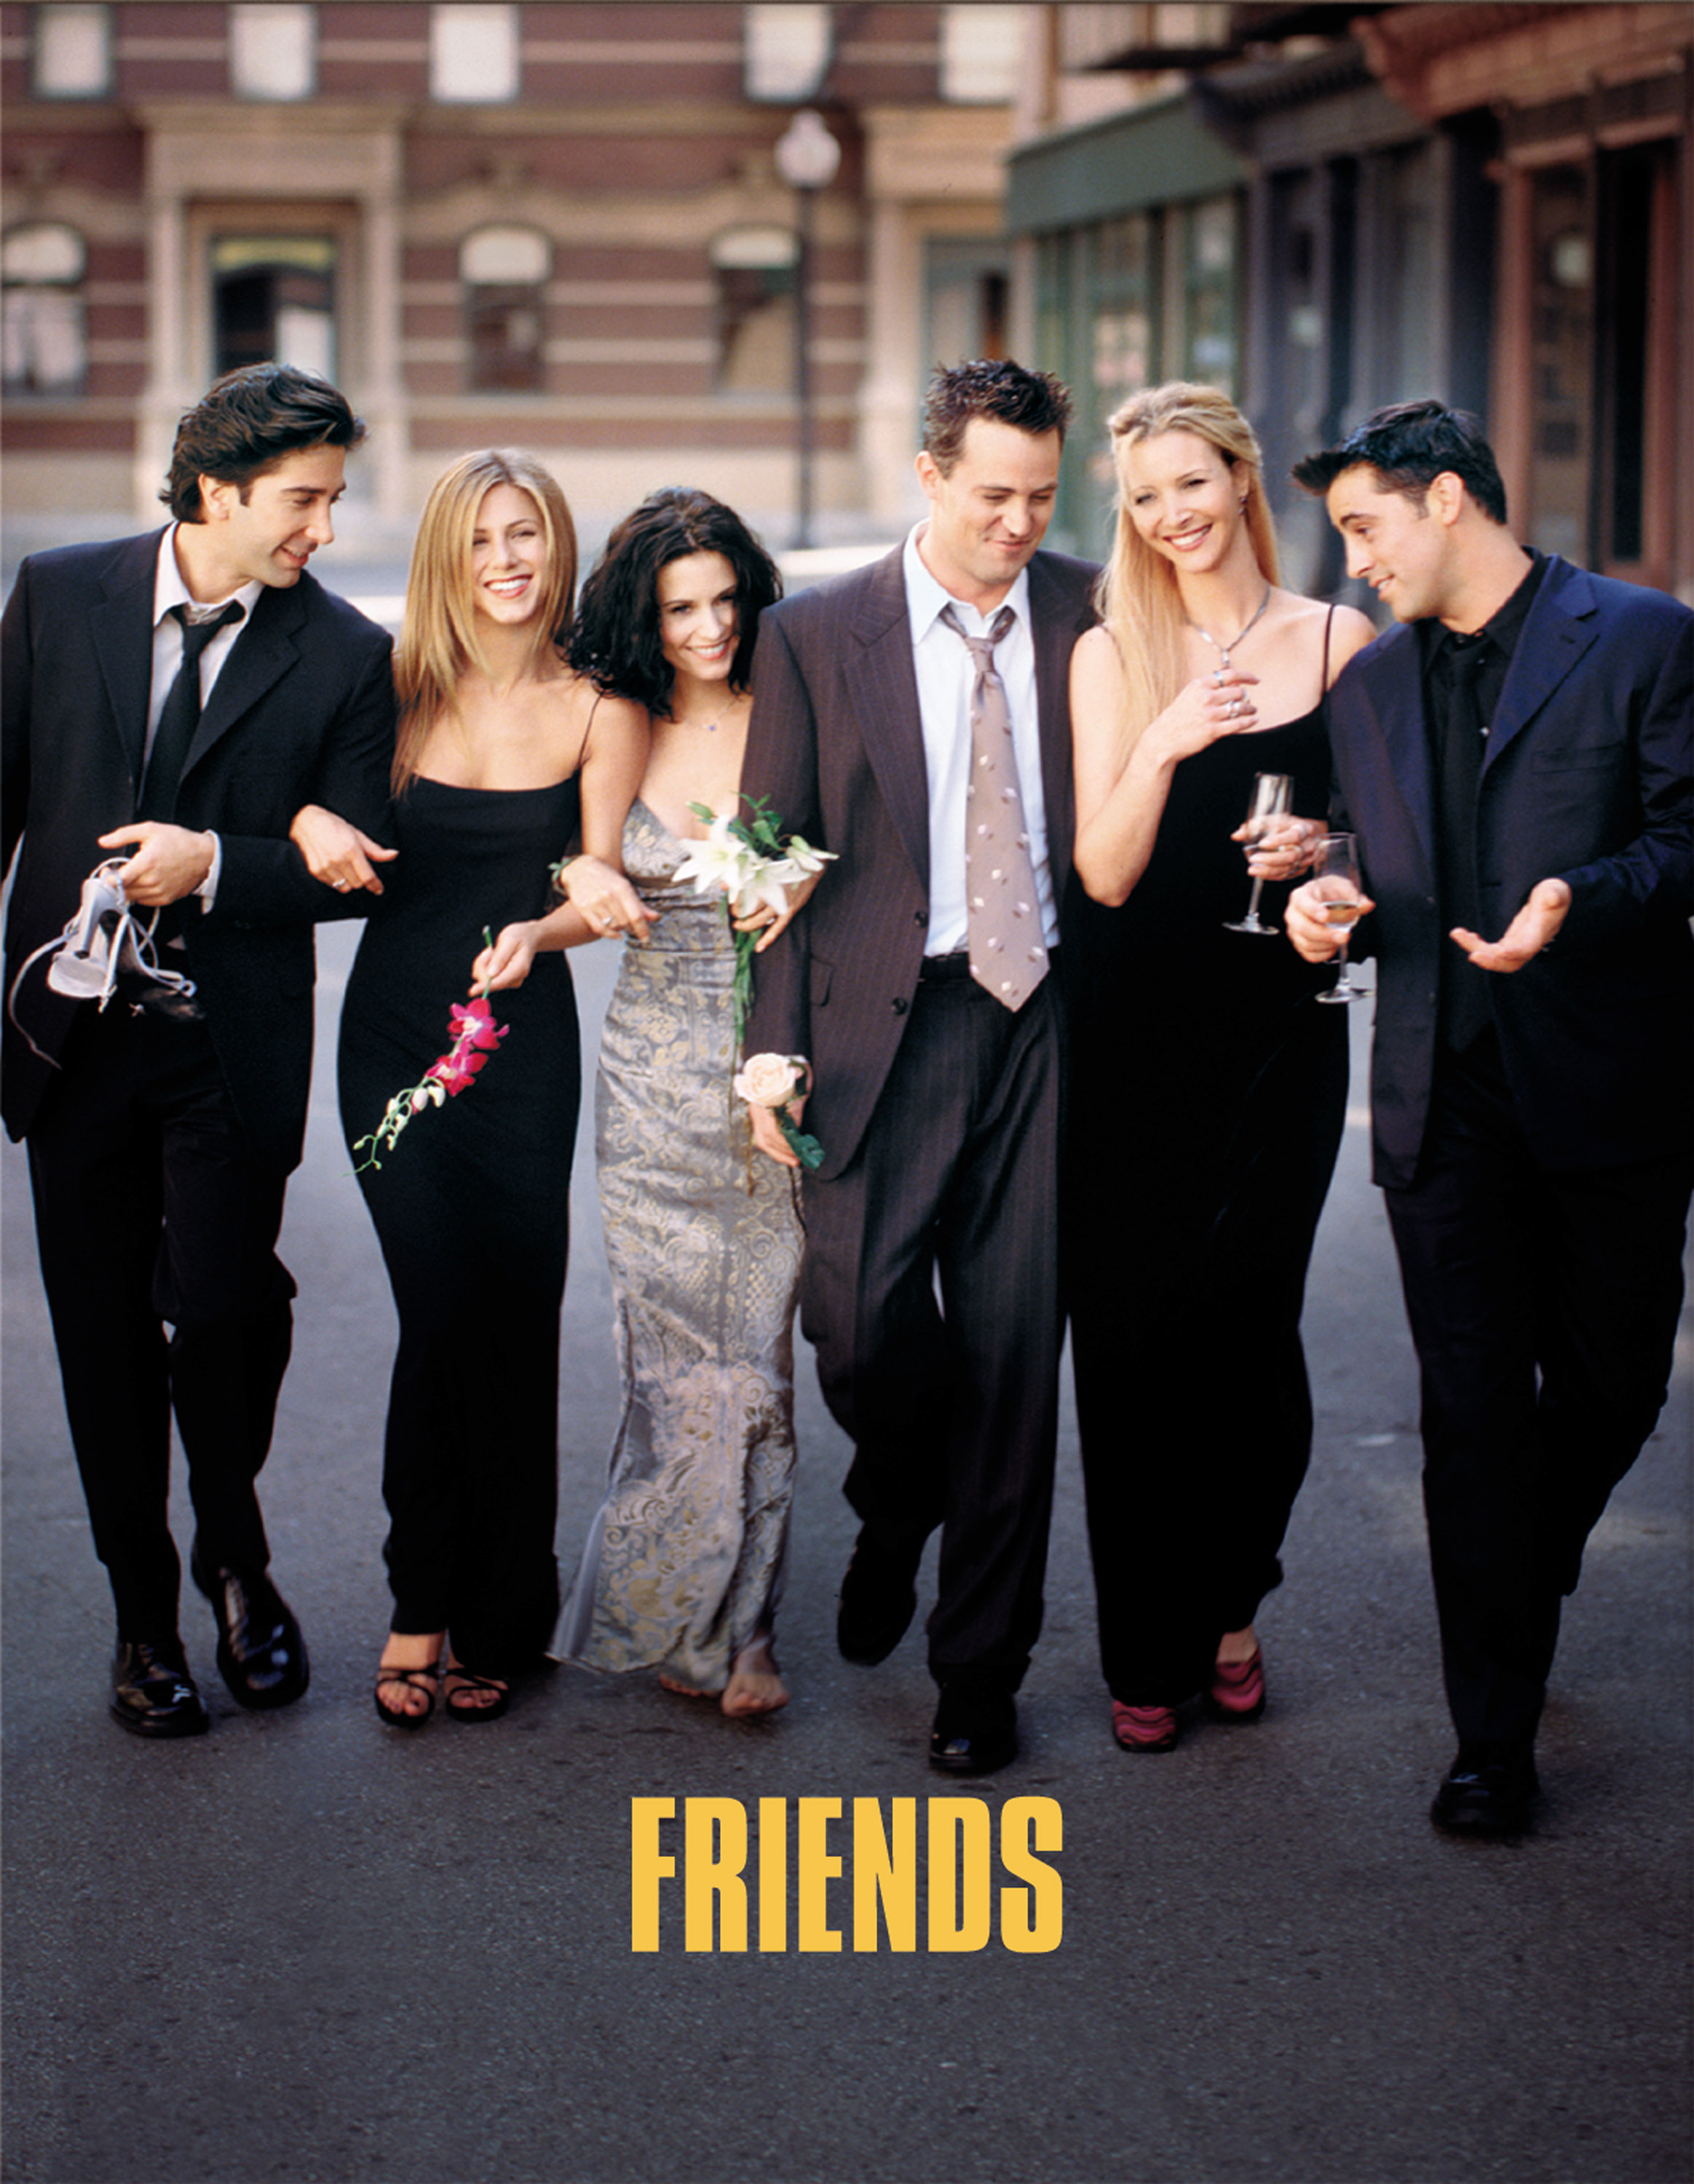 Friends has sustained its popularity throughout the past 20 years.